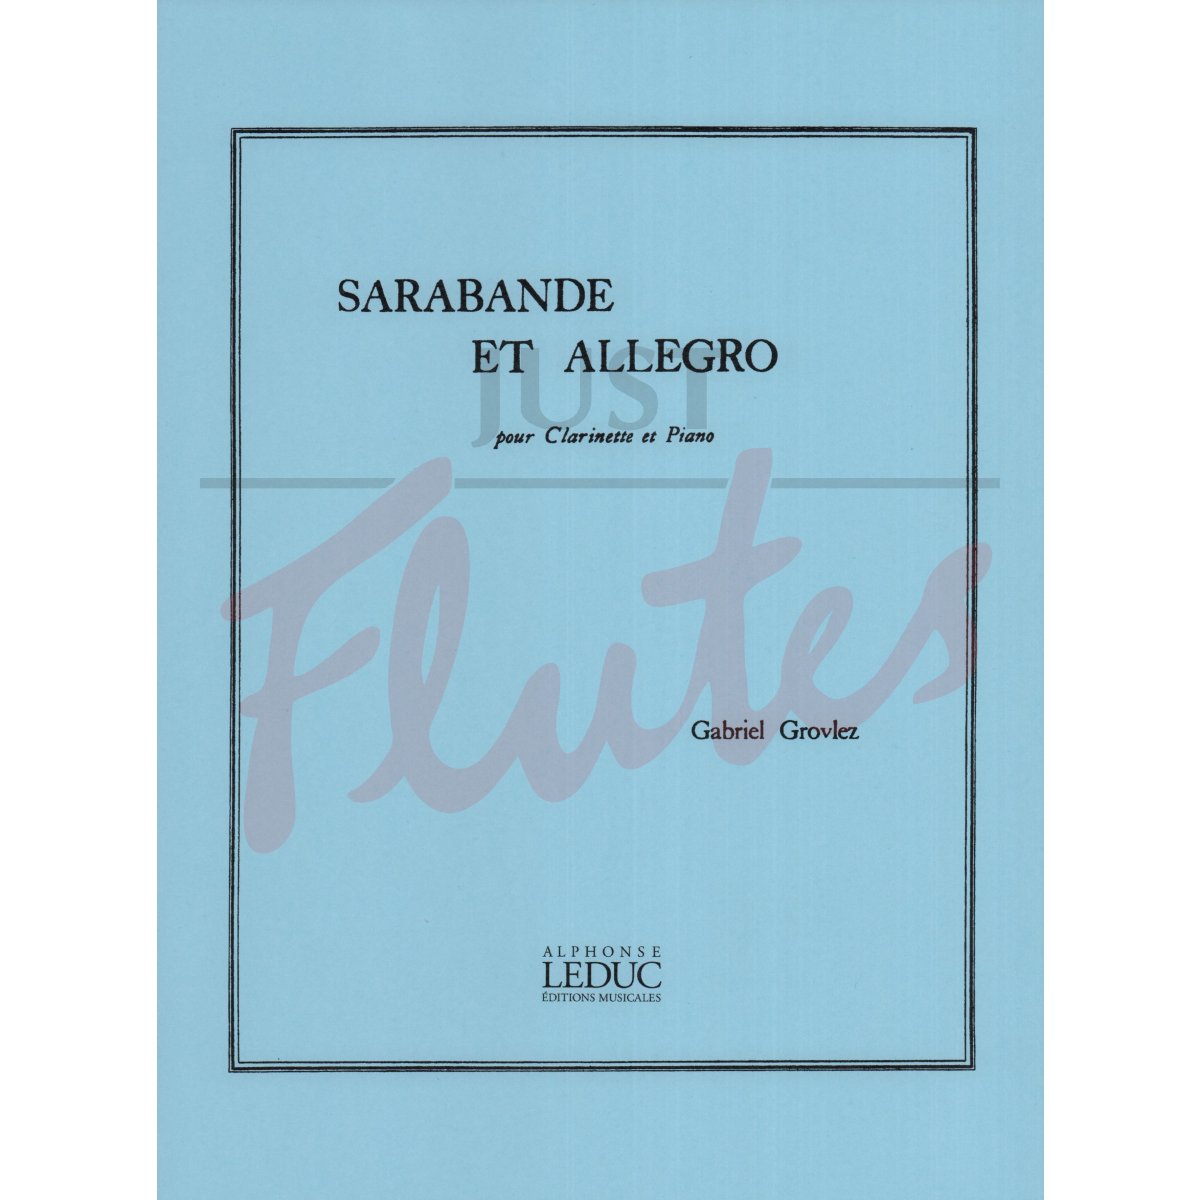 Sarabande and Allegro for Clarinet and Piano